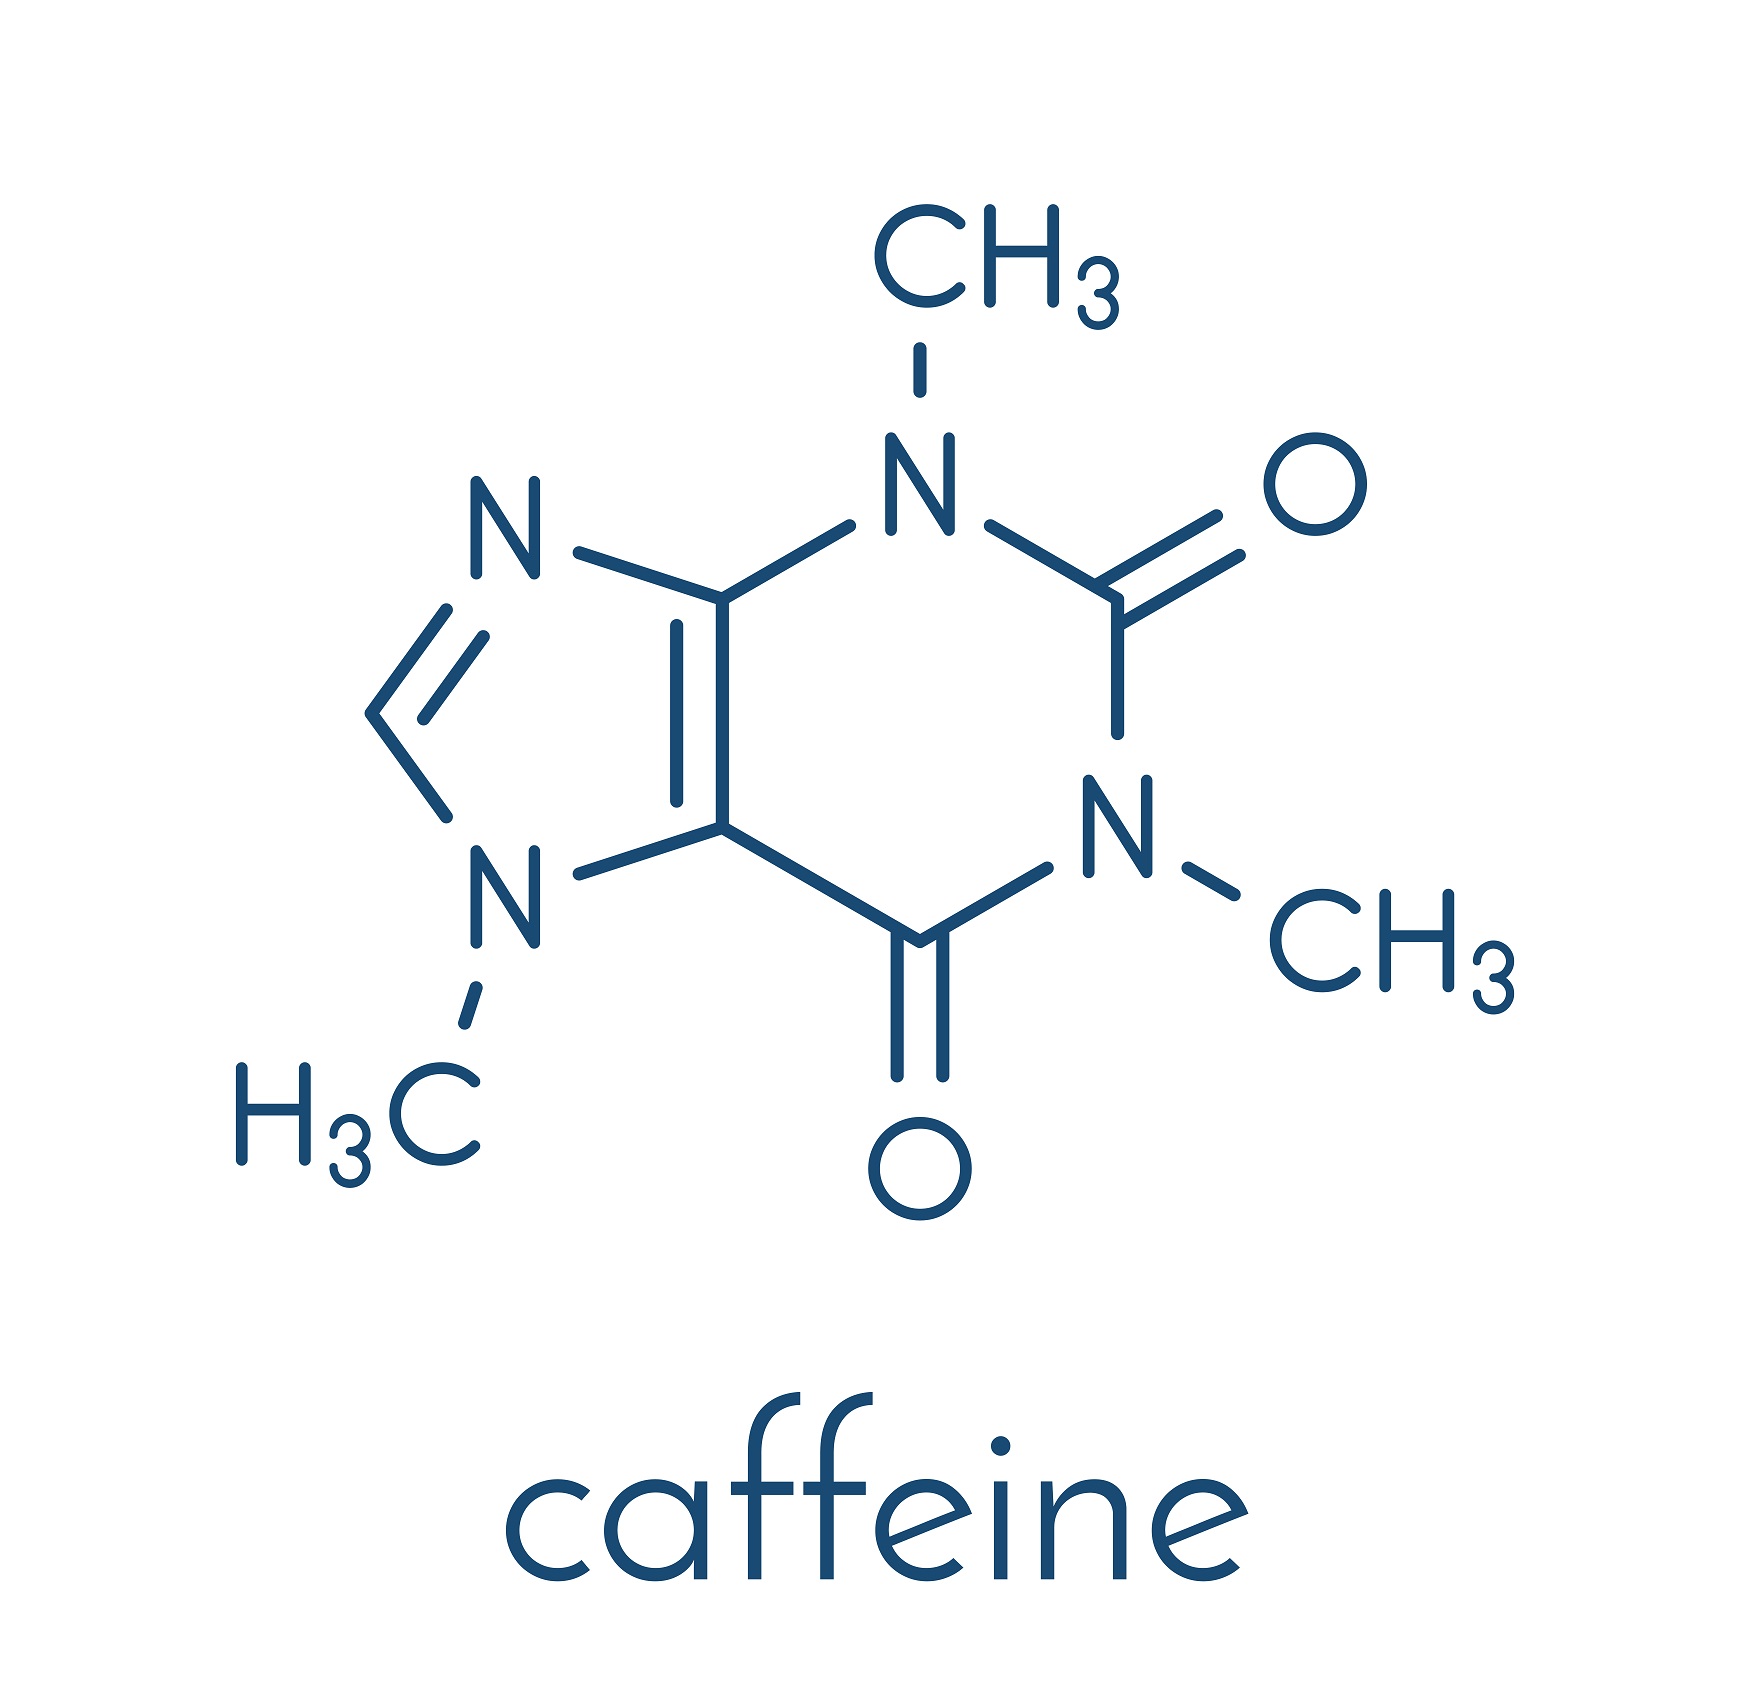 Caffeine - the most known and effective stimulant!